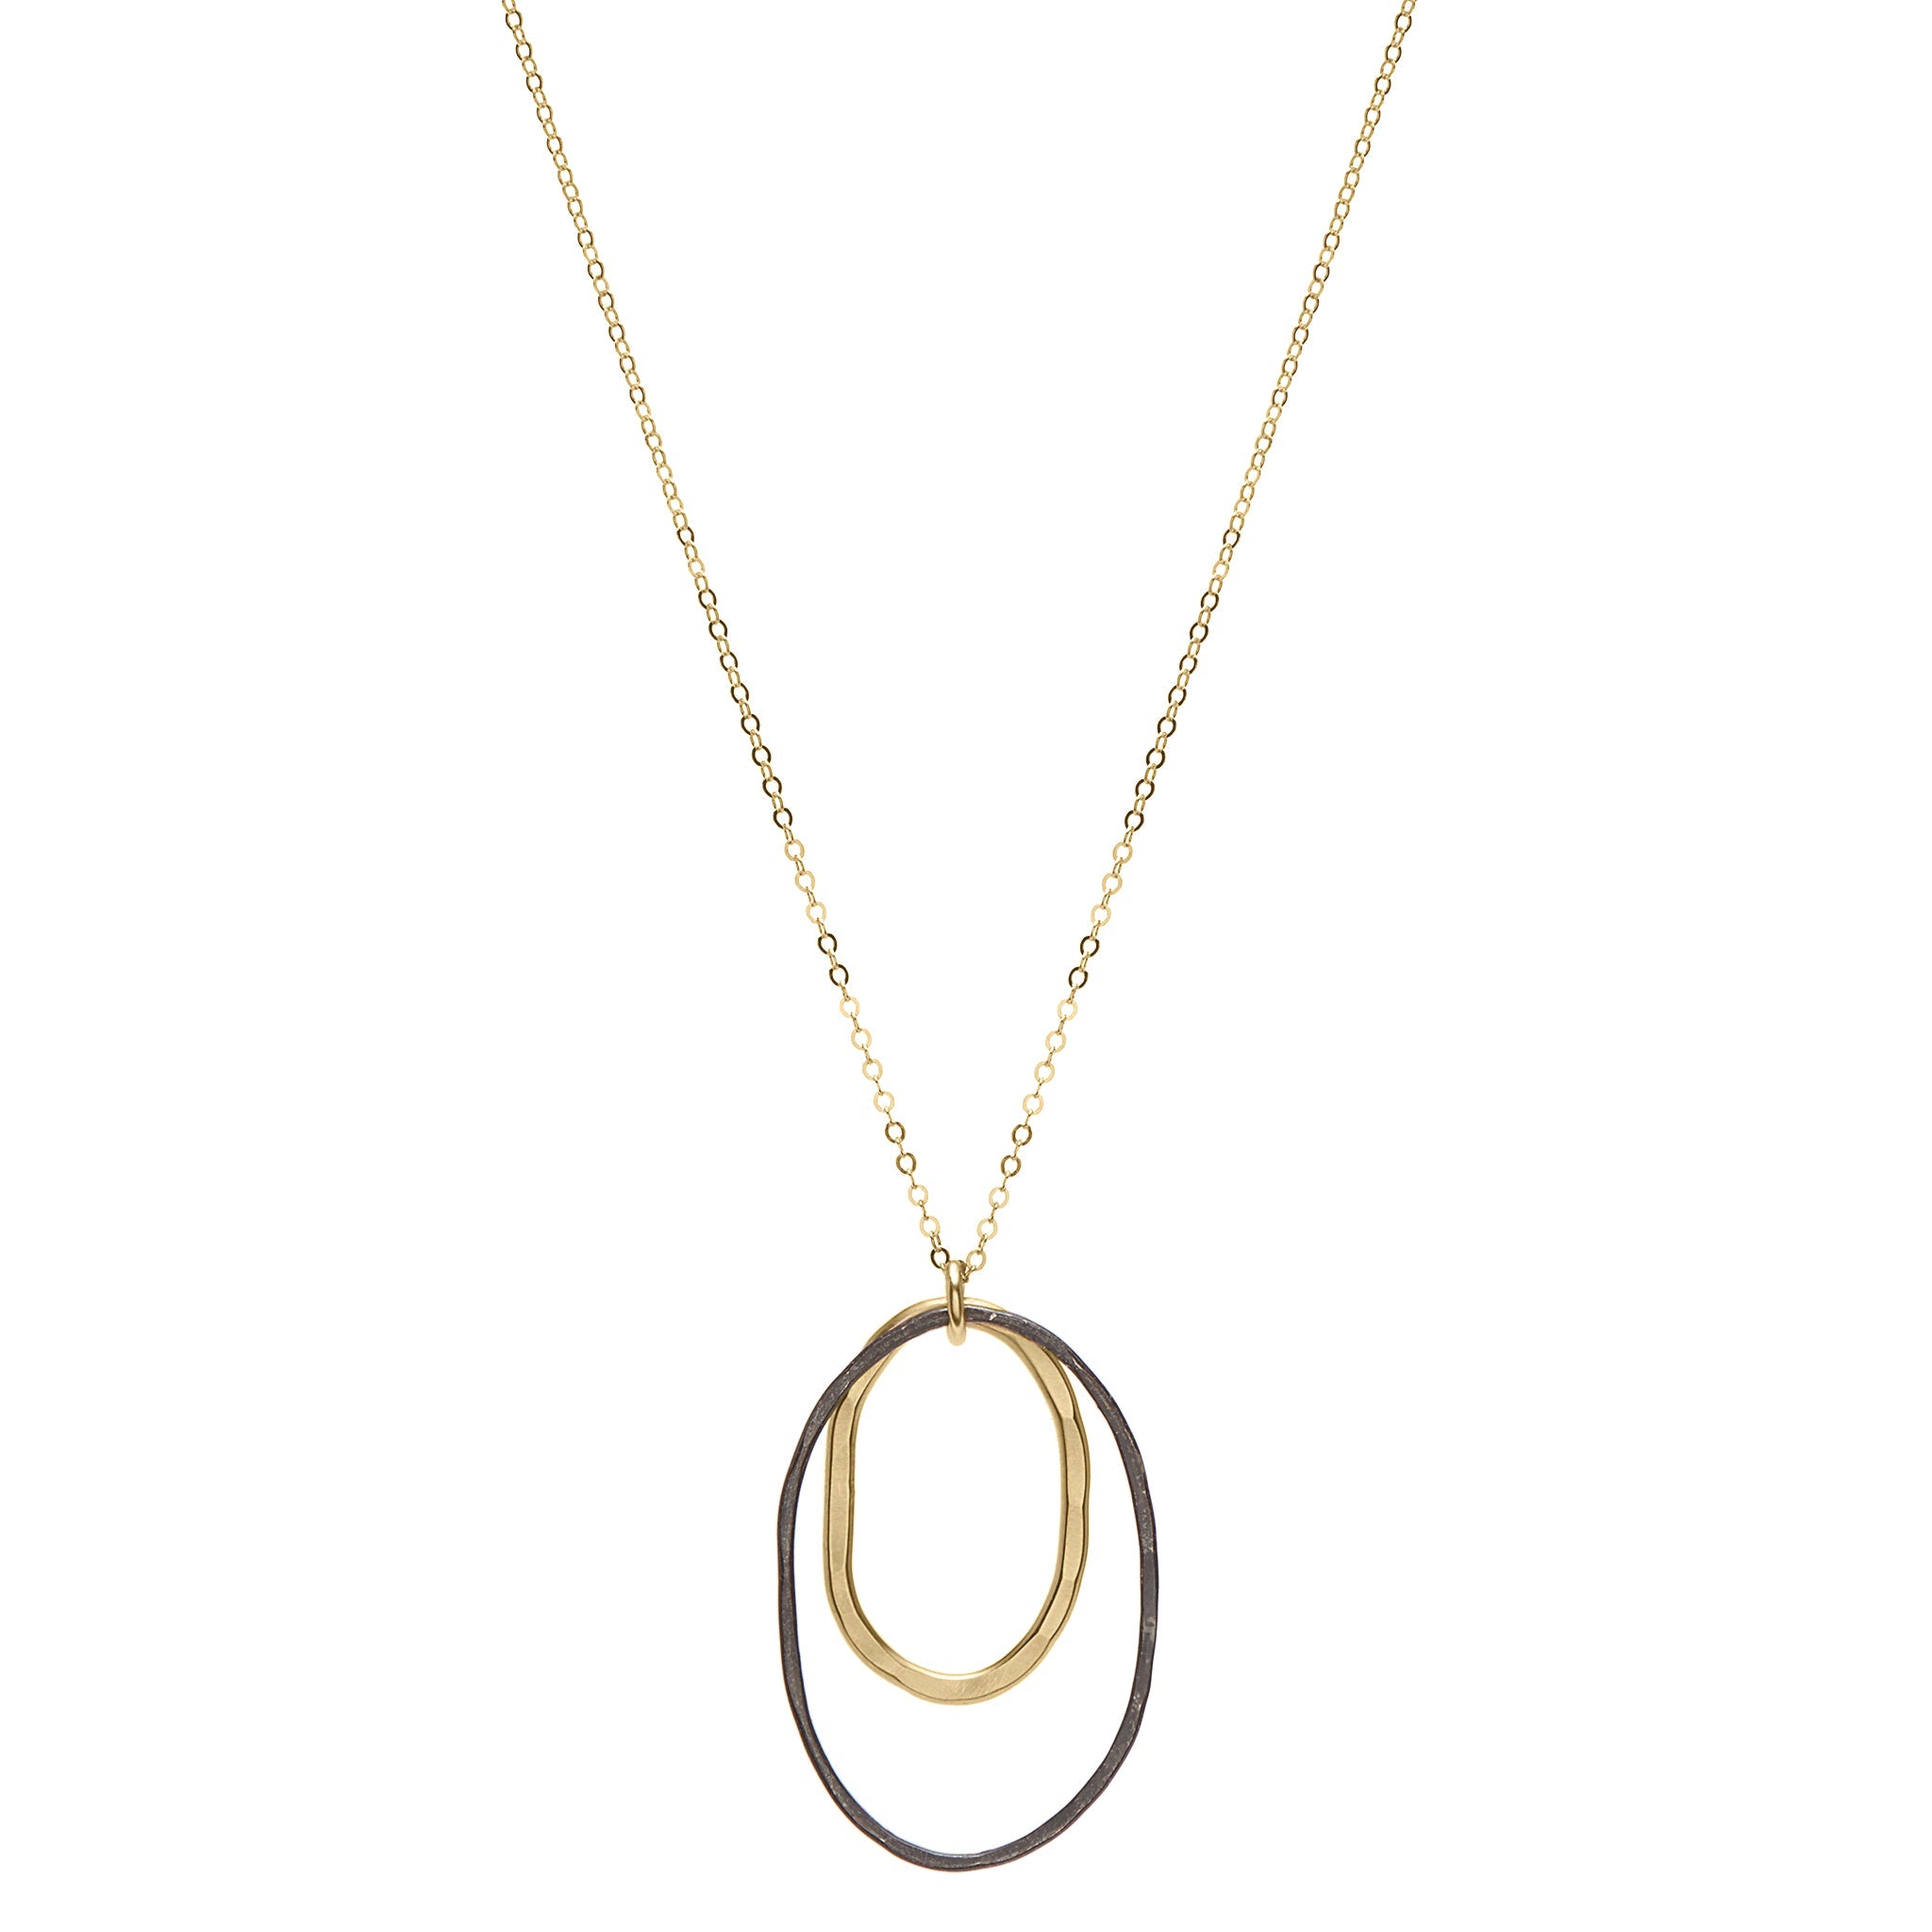 Black + Gold Oval Necklace - Necklaces